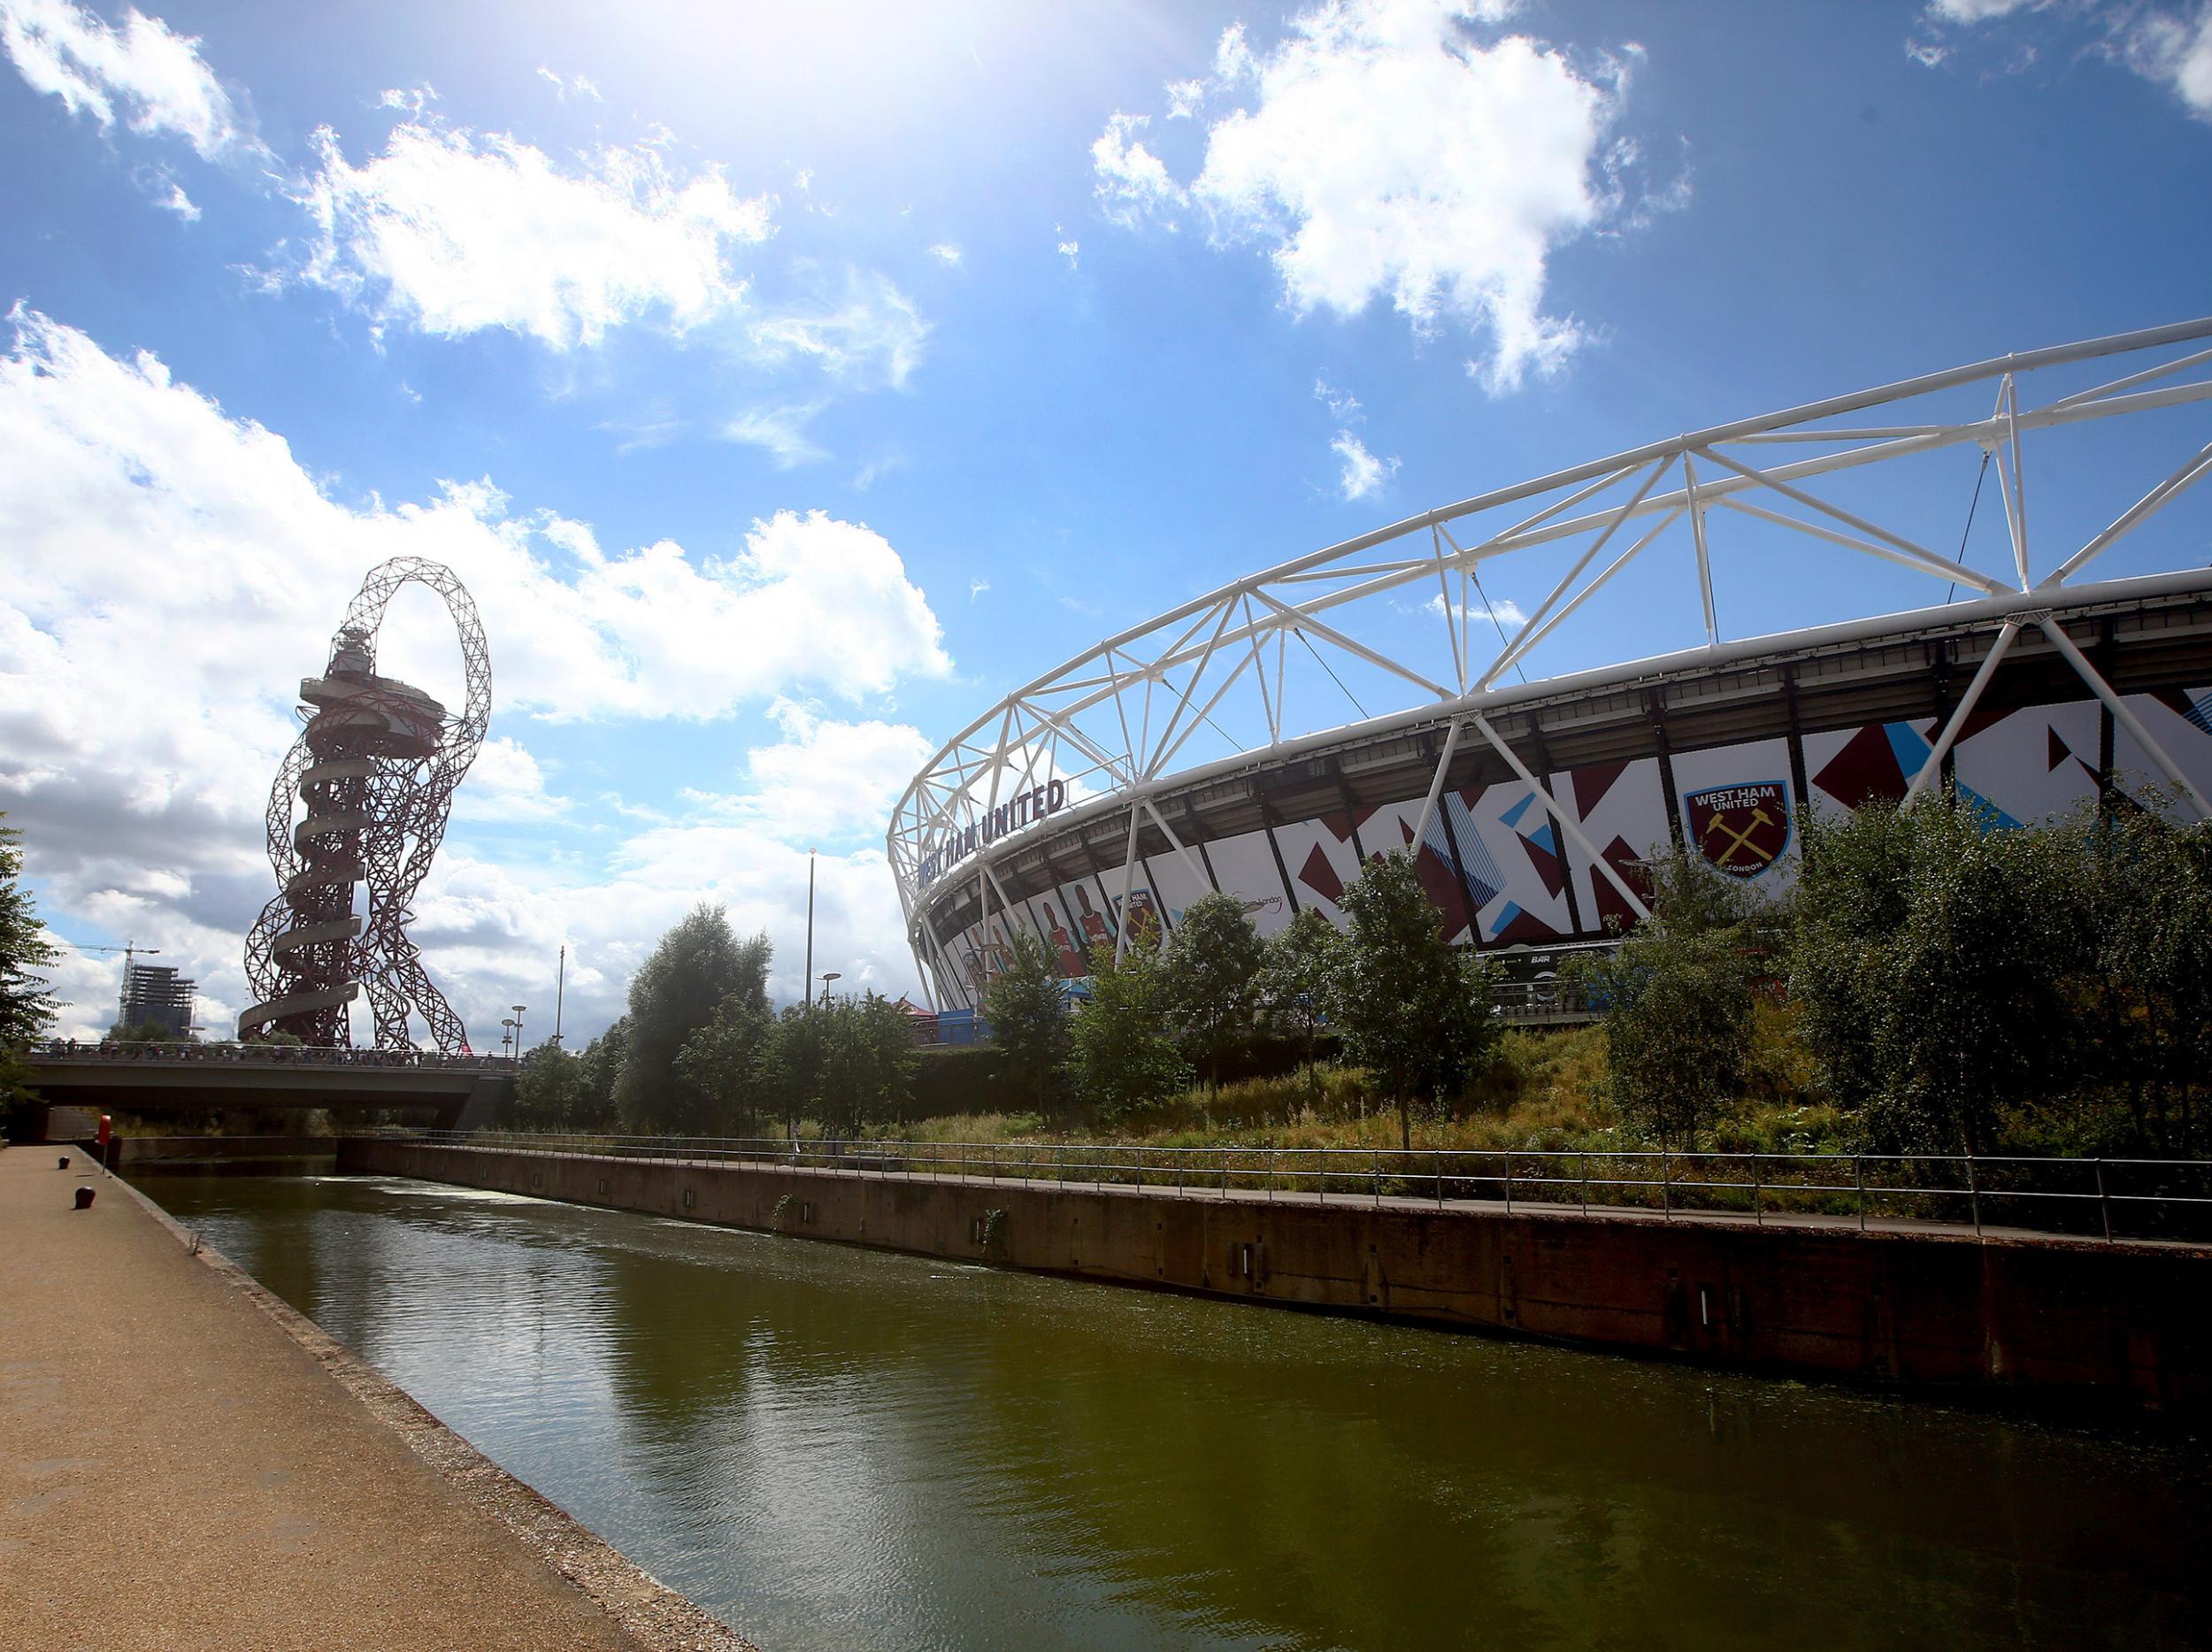 The move to Stratford was a watershed in West Ham’s history